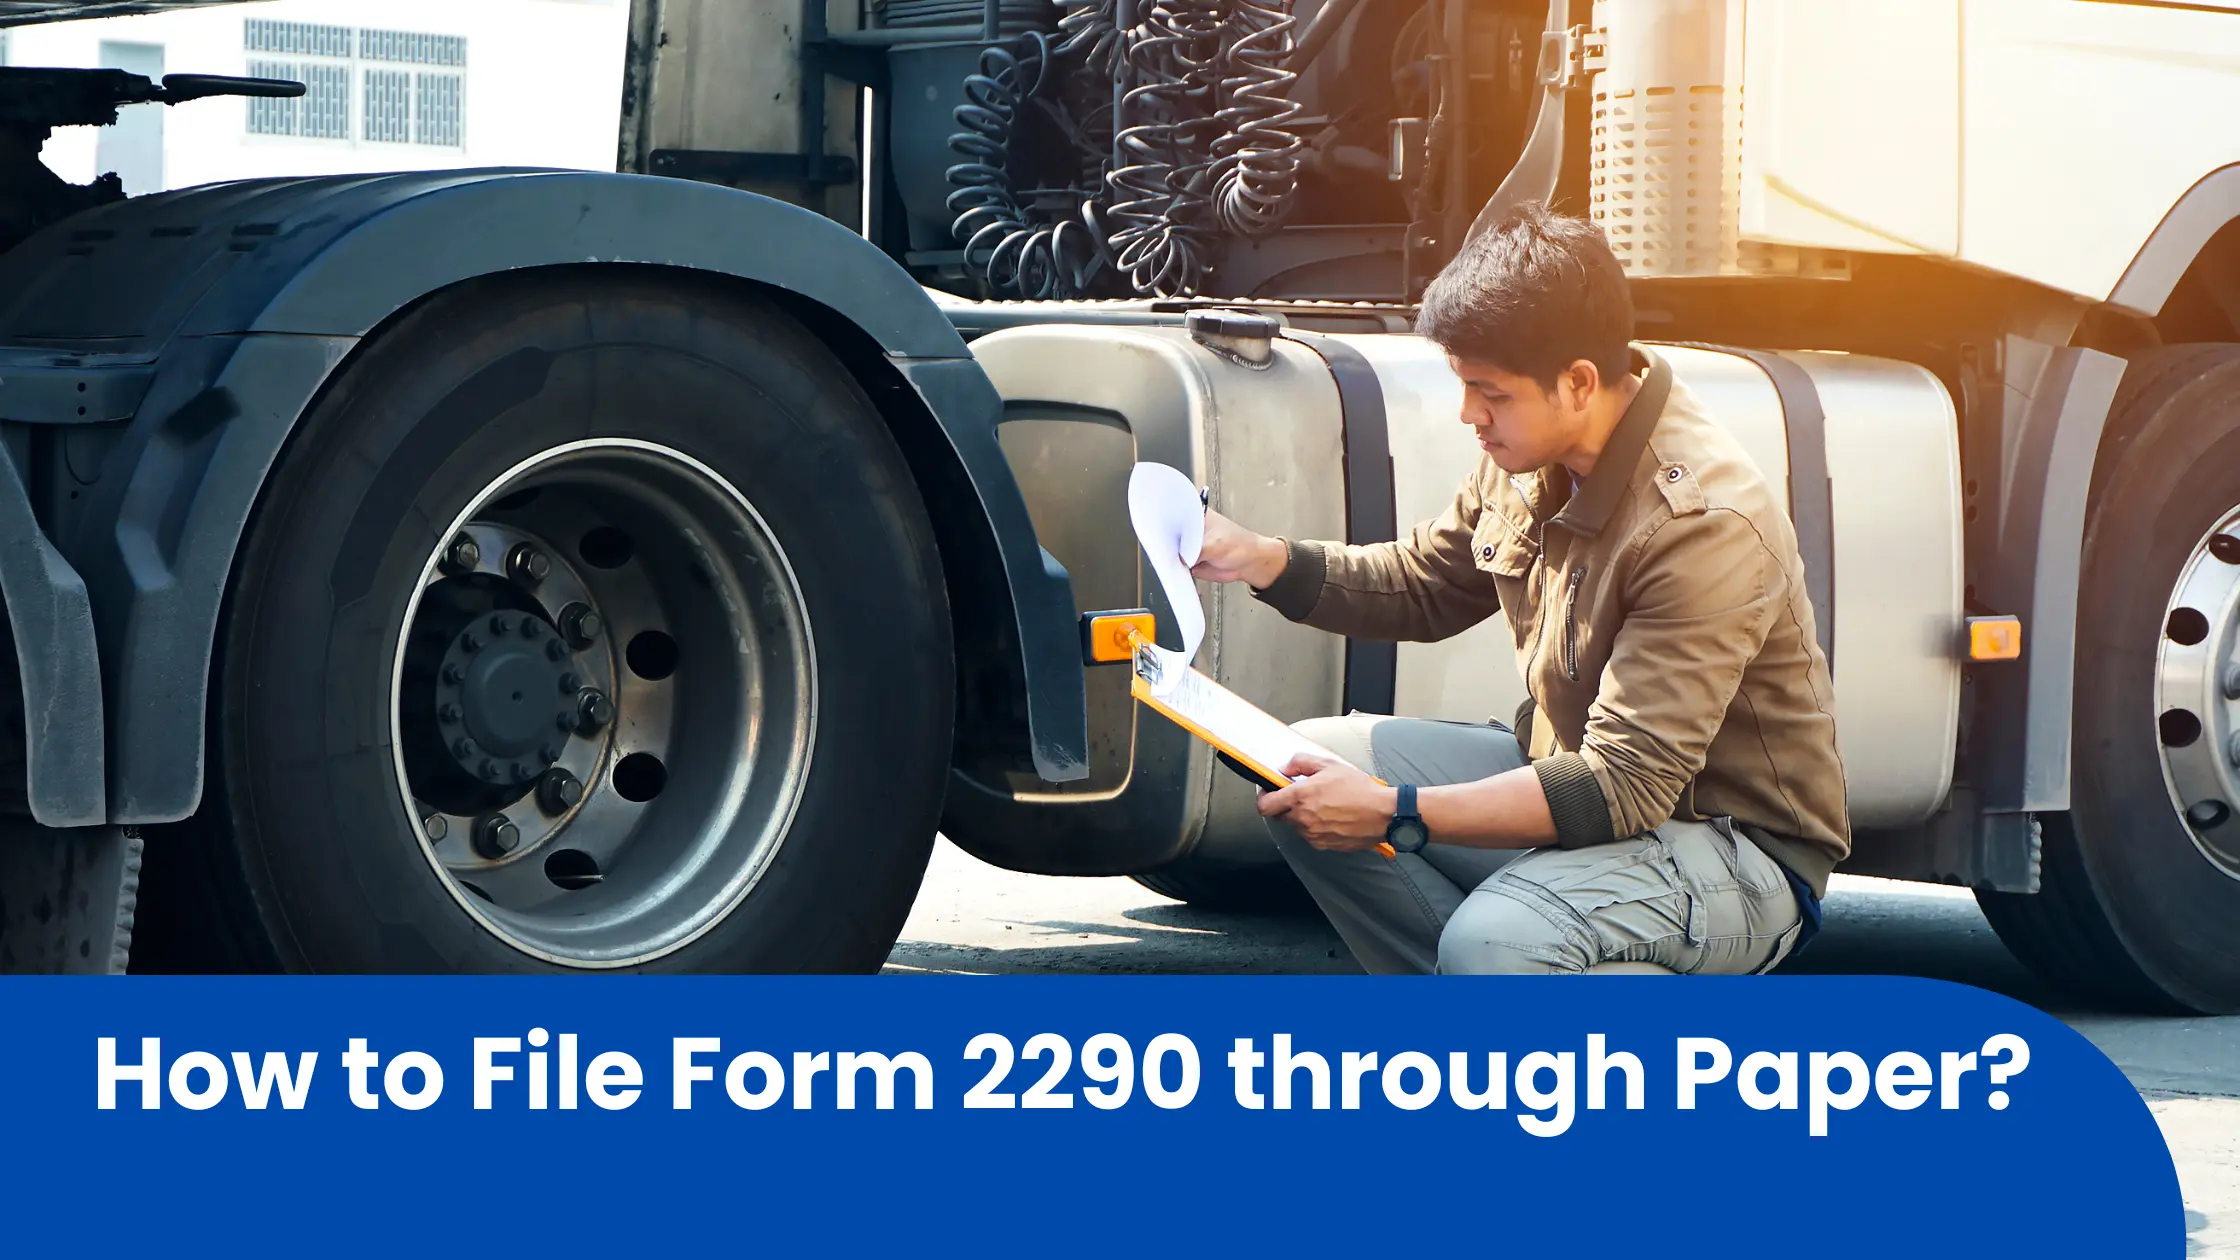 How to File Form 2290 